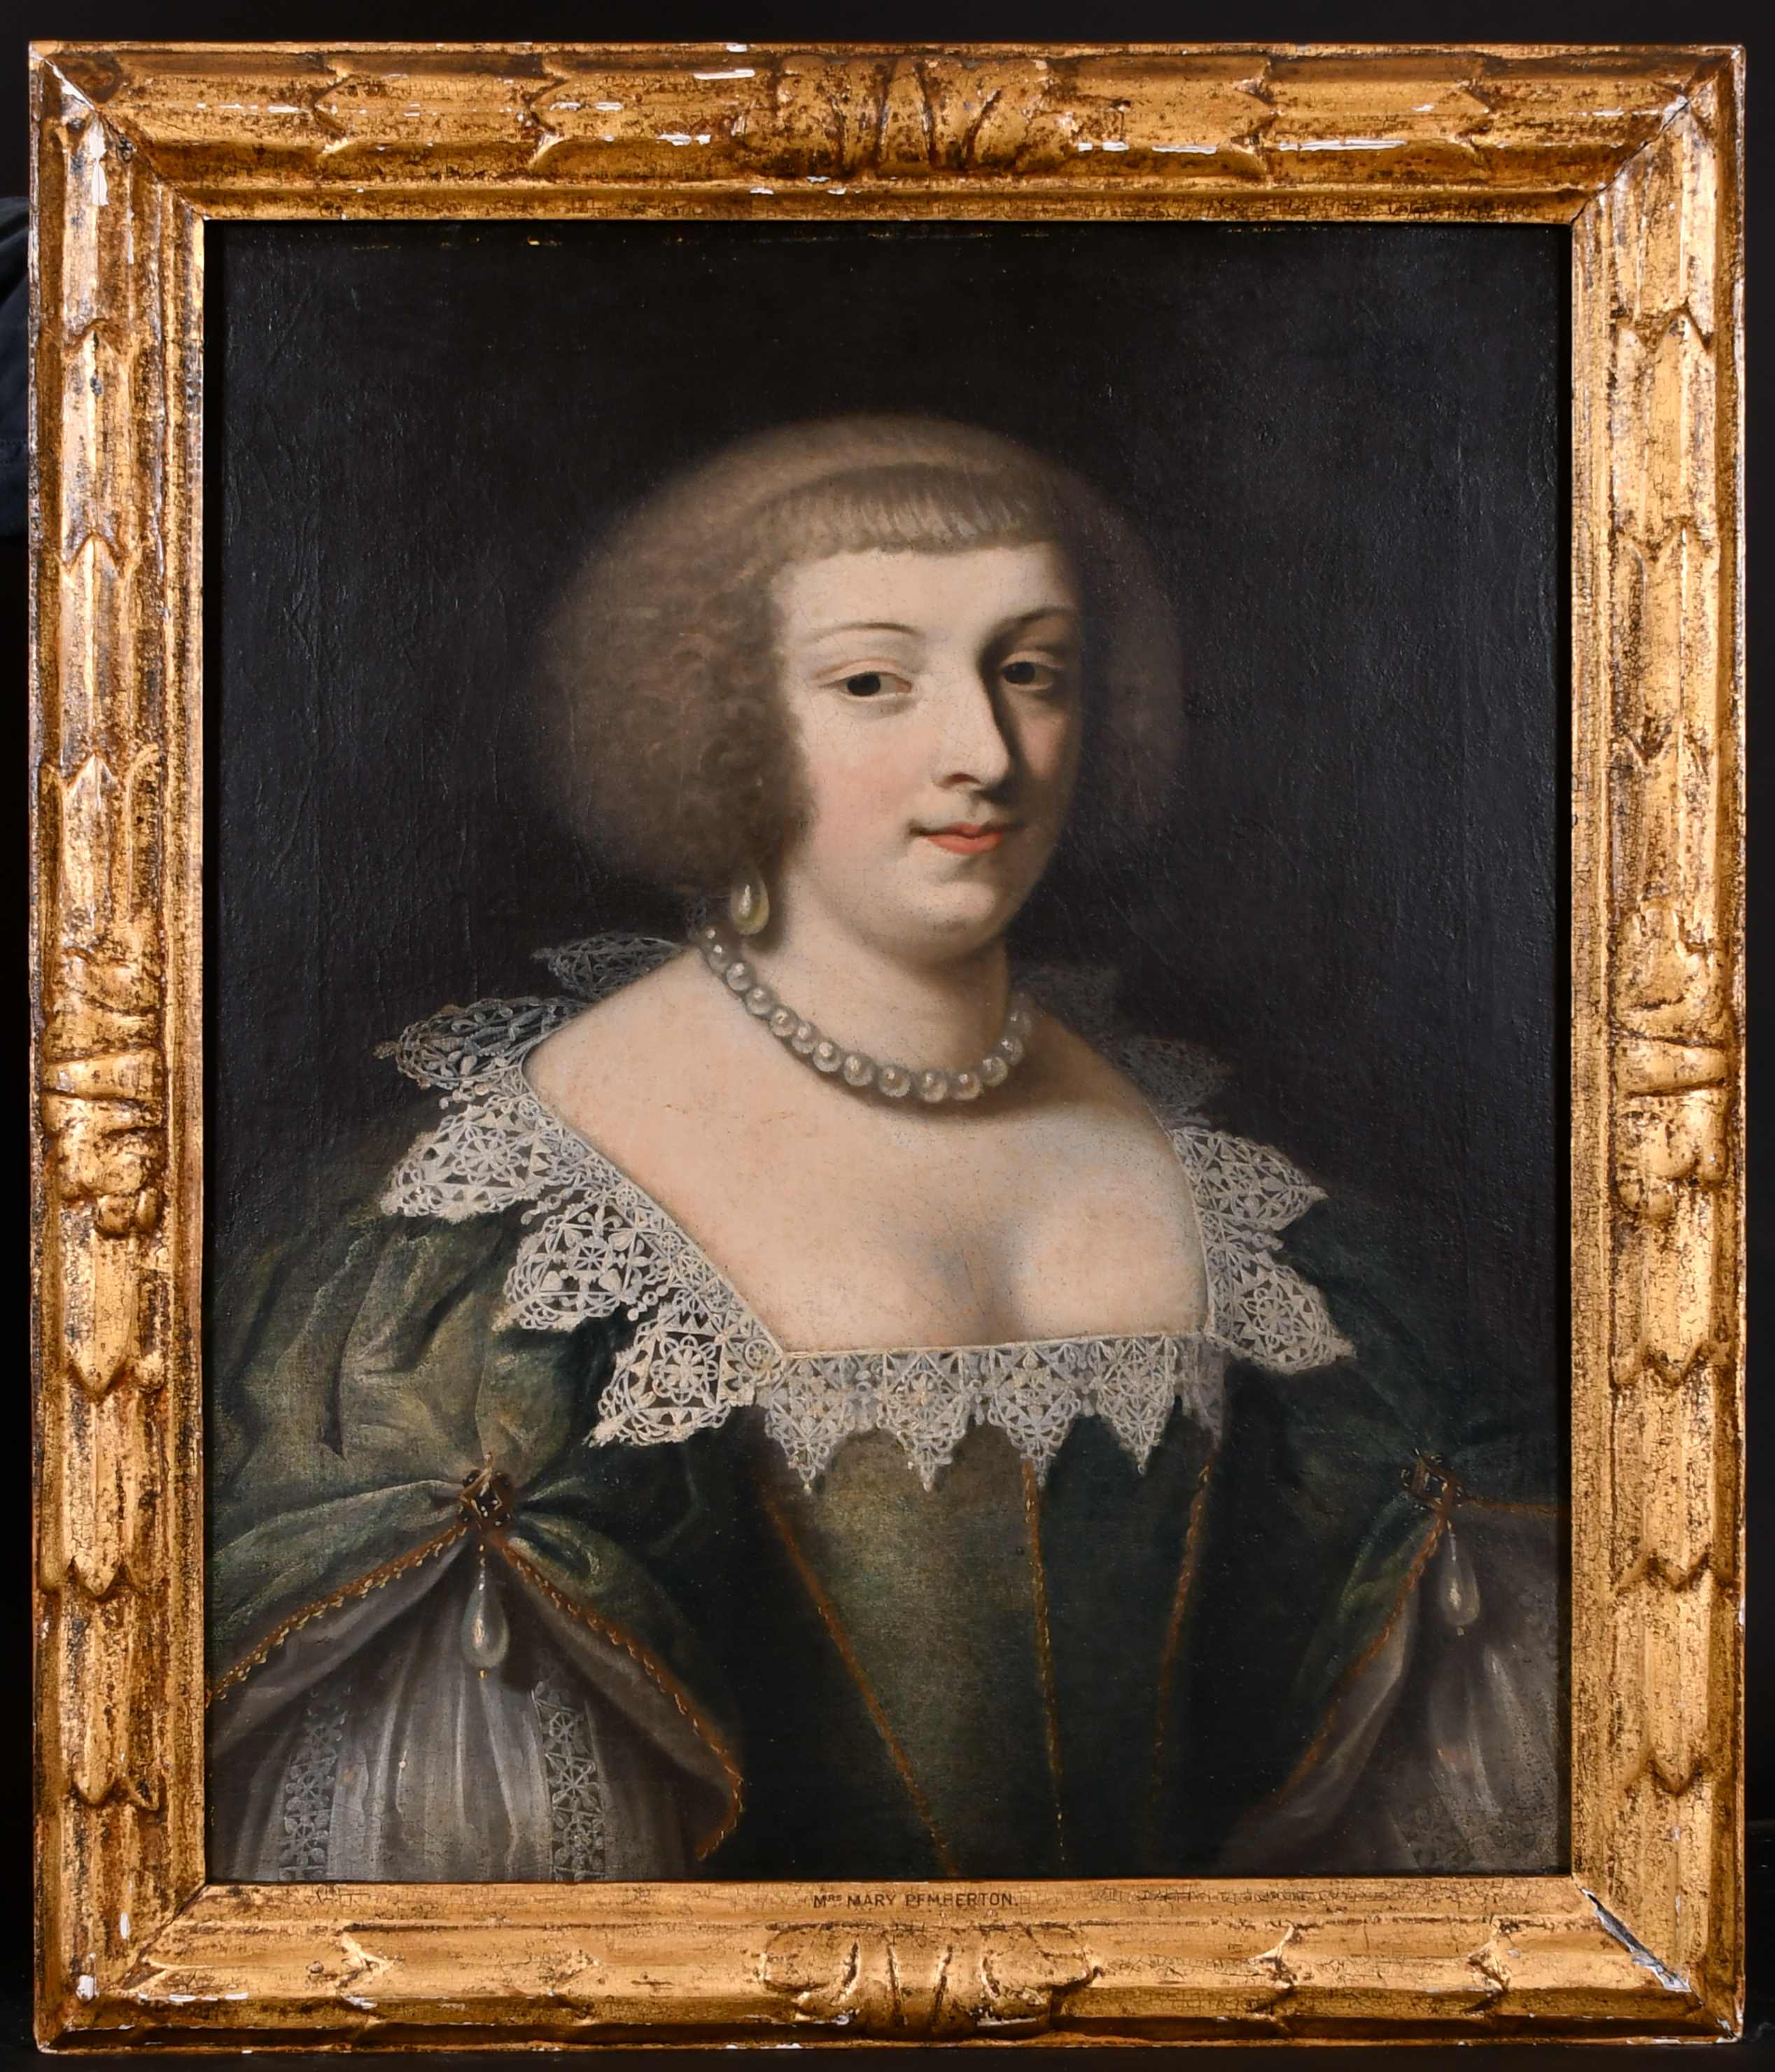 17th Century English School. "Portrait of Mrs Pemberton", Oil on canvas, Inscribed on a label on the - Image 2 of 8